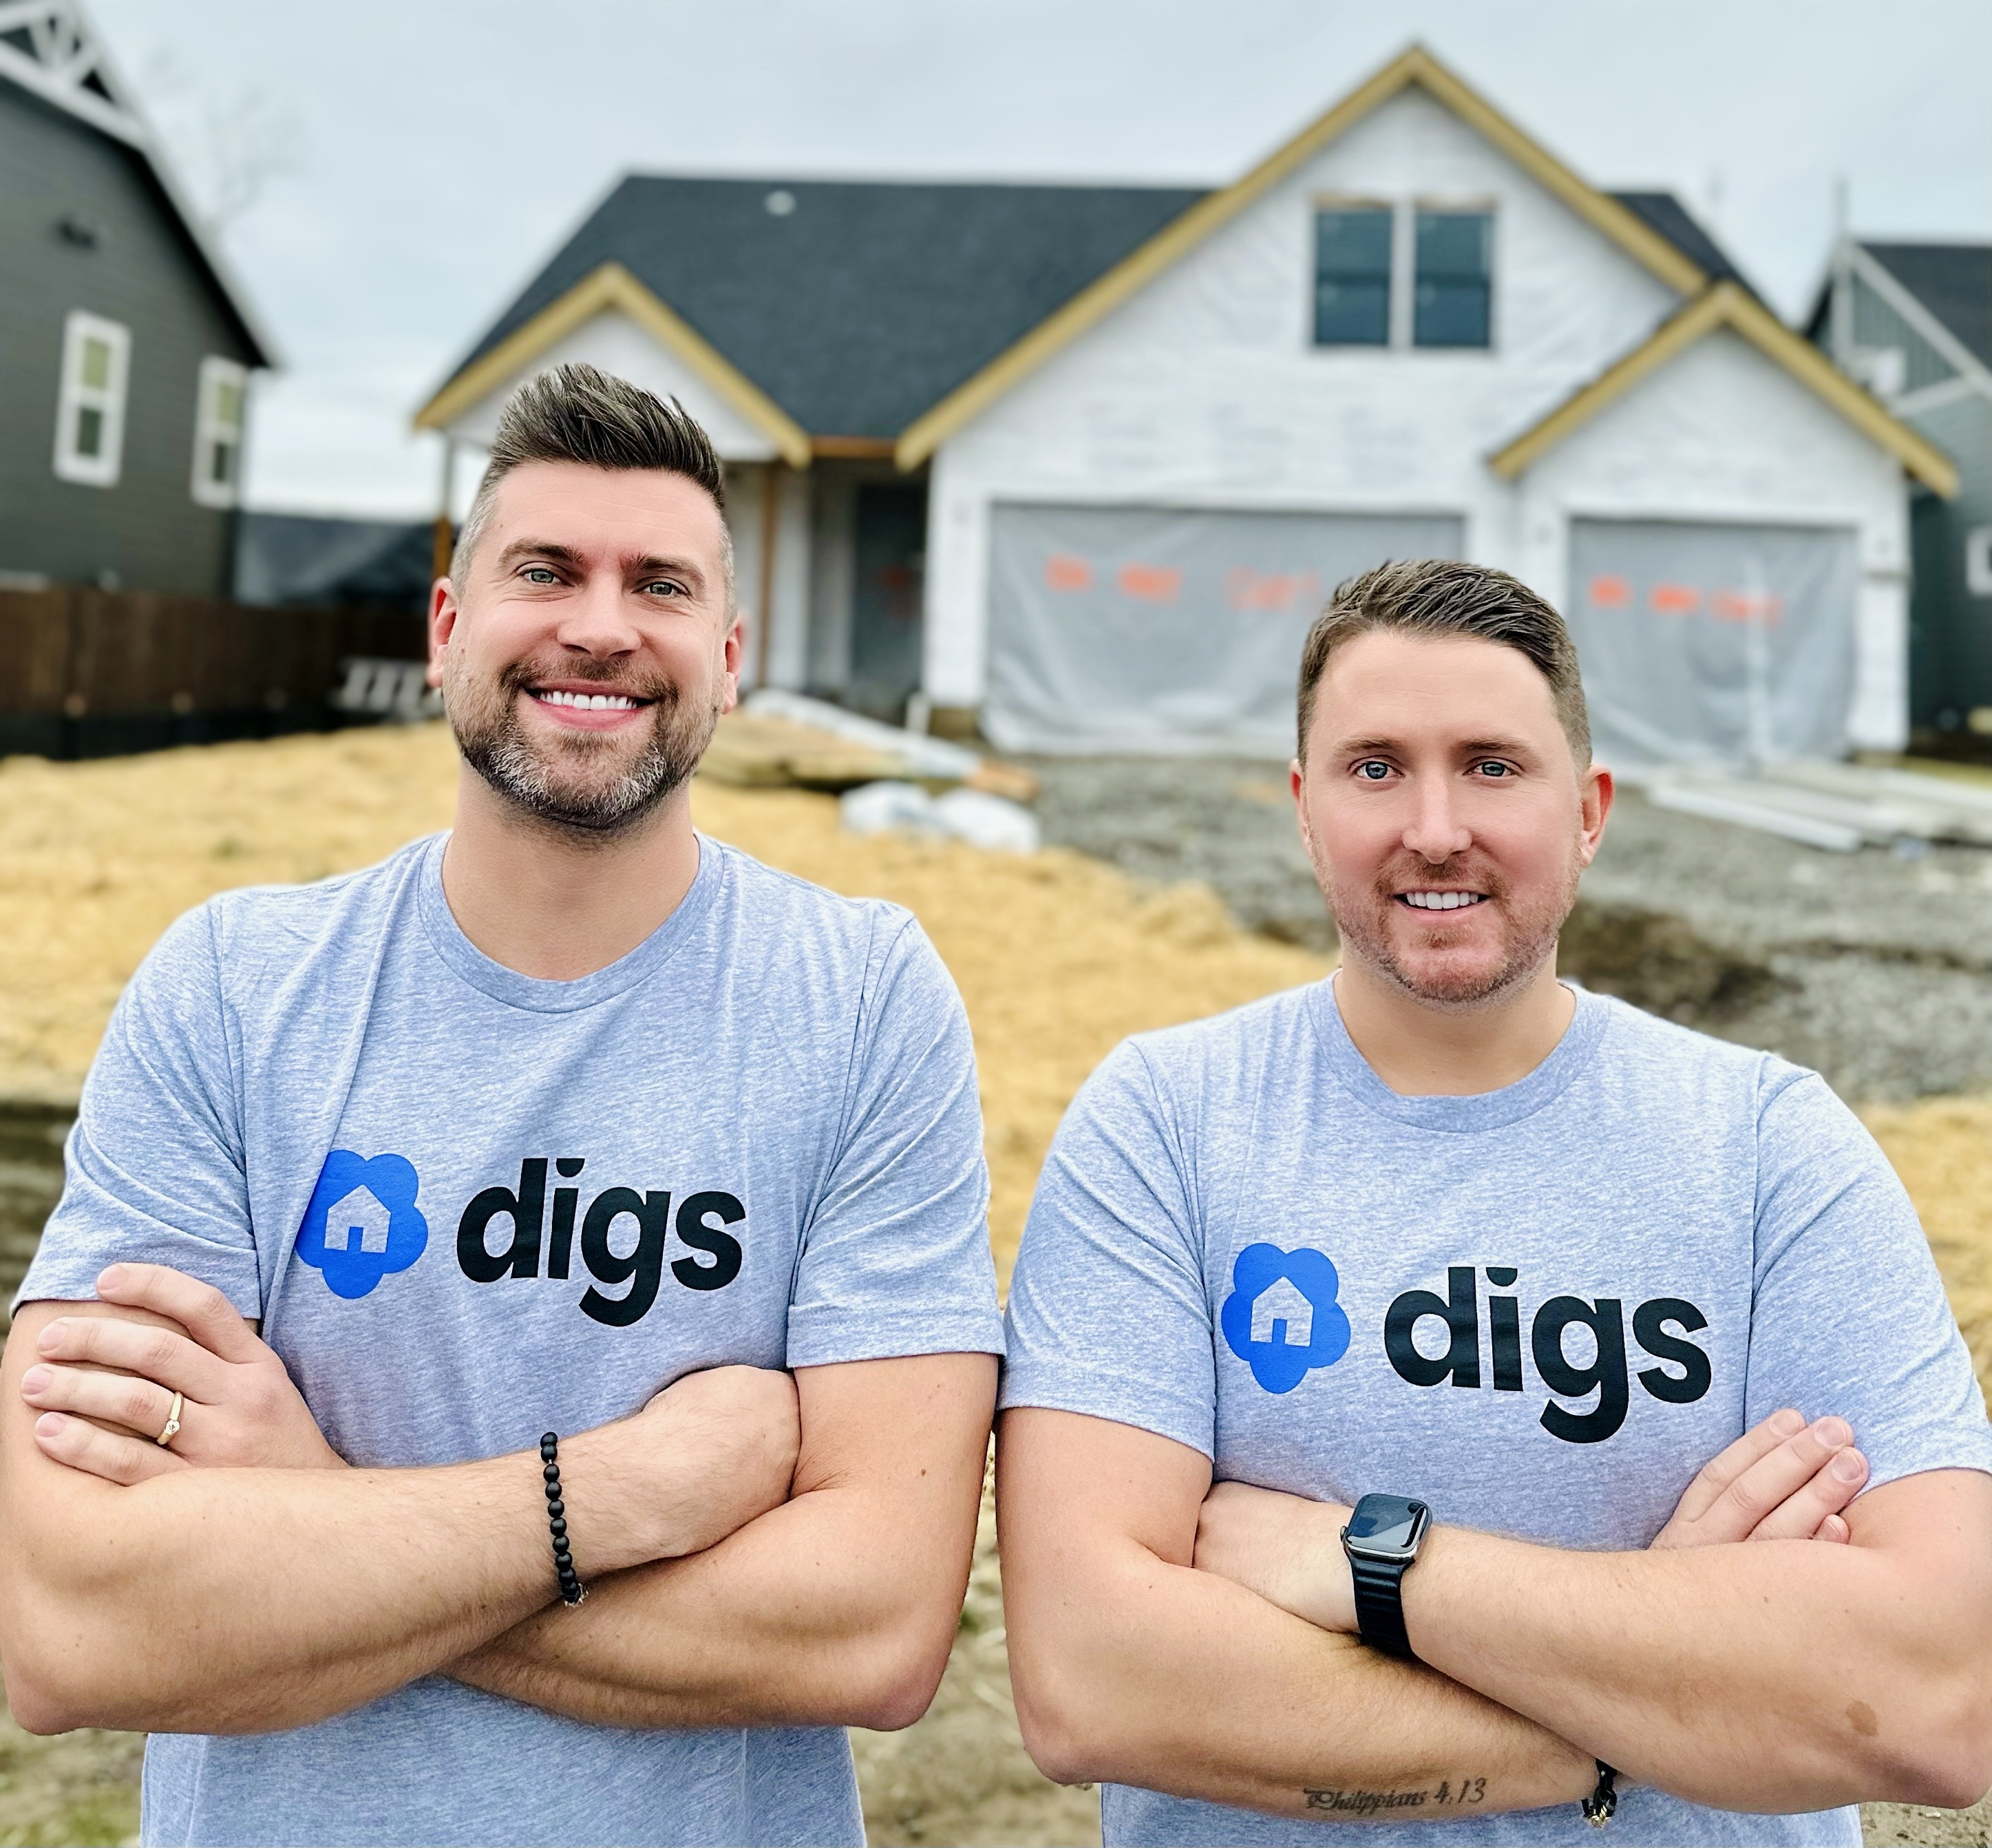 Digs is a Figma-like collaboration tool for home builders and suppliers